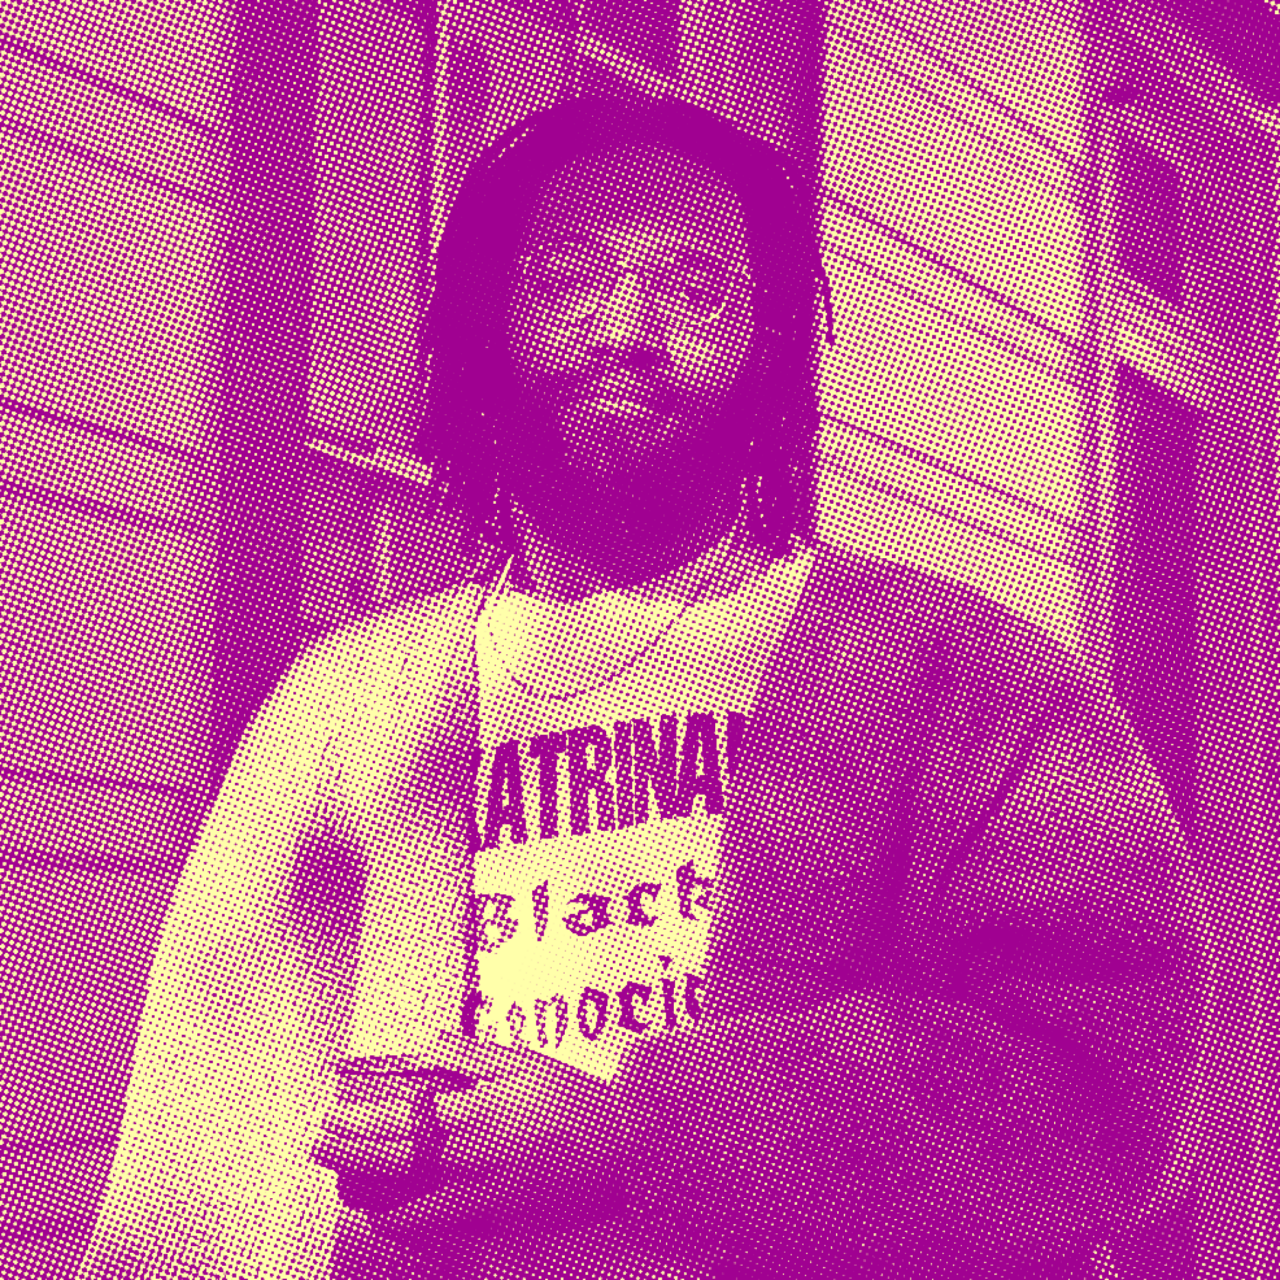 A man with brown skin, medium length dreadlocks wearing gold glasses stands behind a blue shotgun home on his balcony wearing a light brown cardigan with a t-shirt reading "Katrina! Black Genocide" as he holds a blue enamel coffee cup looking at the camera directly with a small smile apparent.